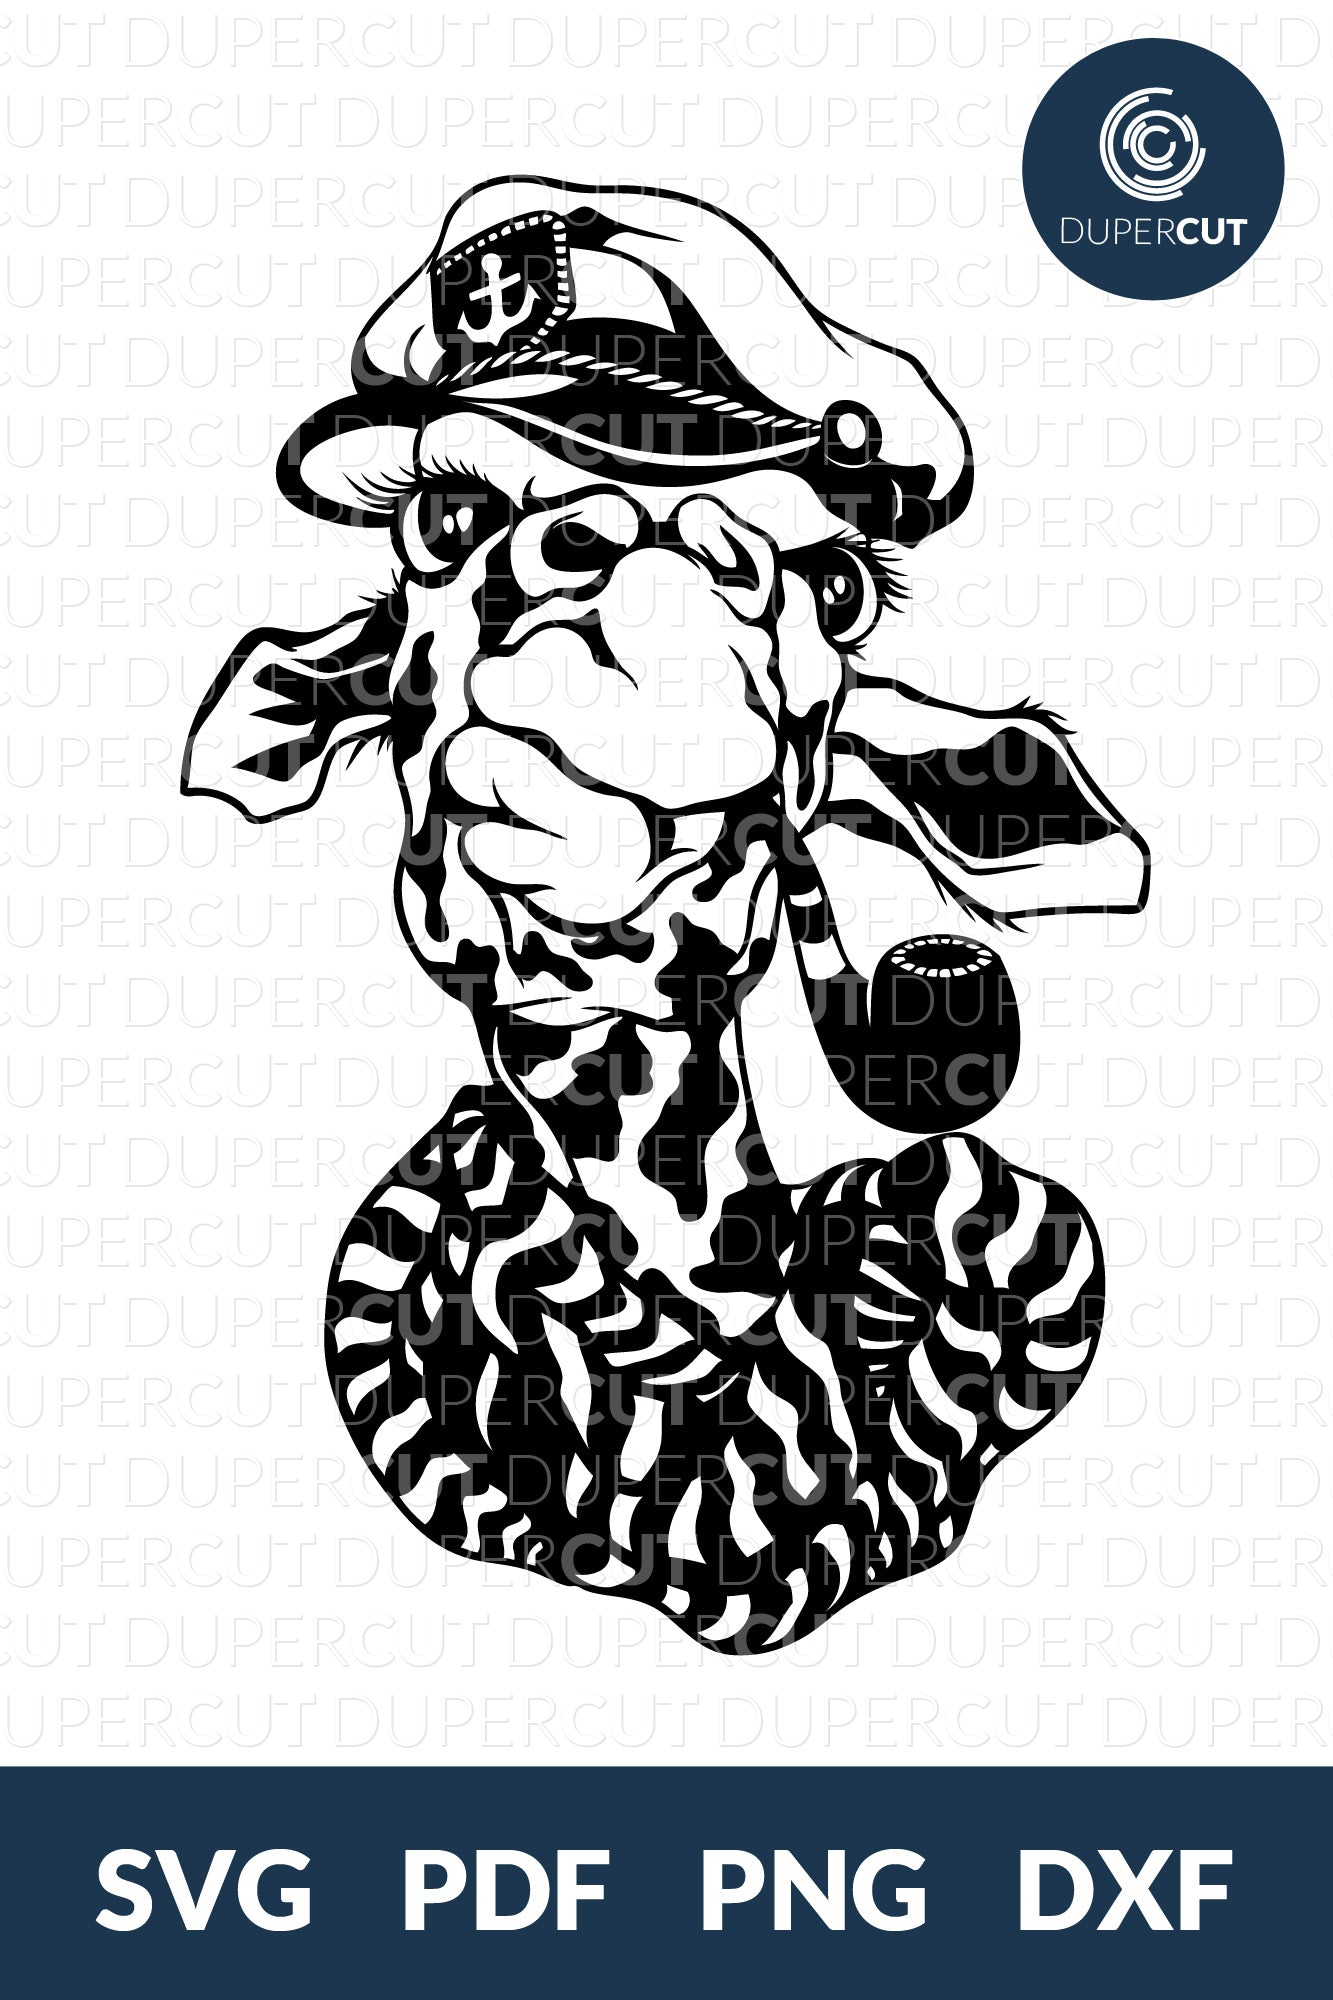 Black and white giraffe line art illustration. SVG PNG DXF cutting files for Cricut, Silhouette, Glowforge, print on demand, sublimation templates